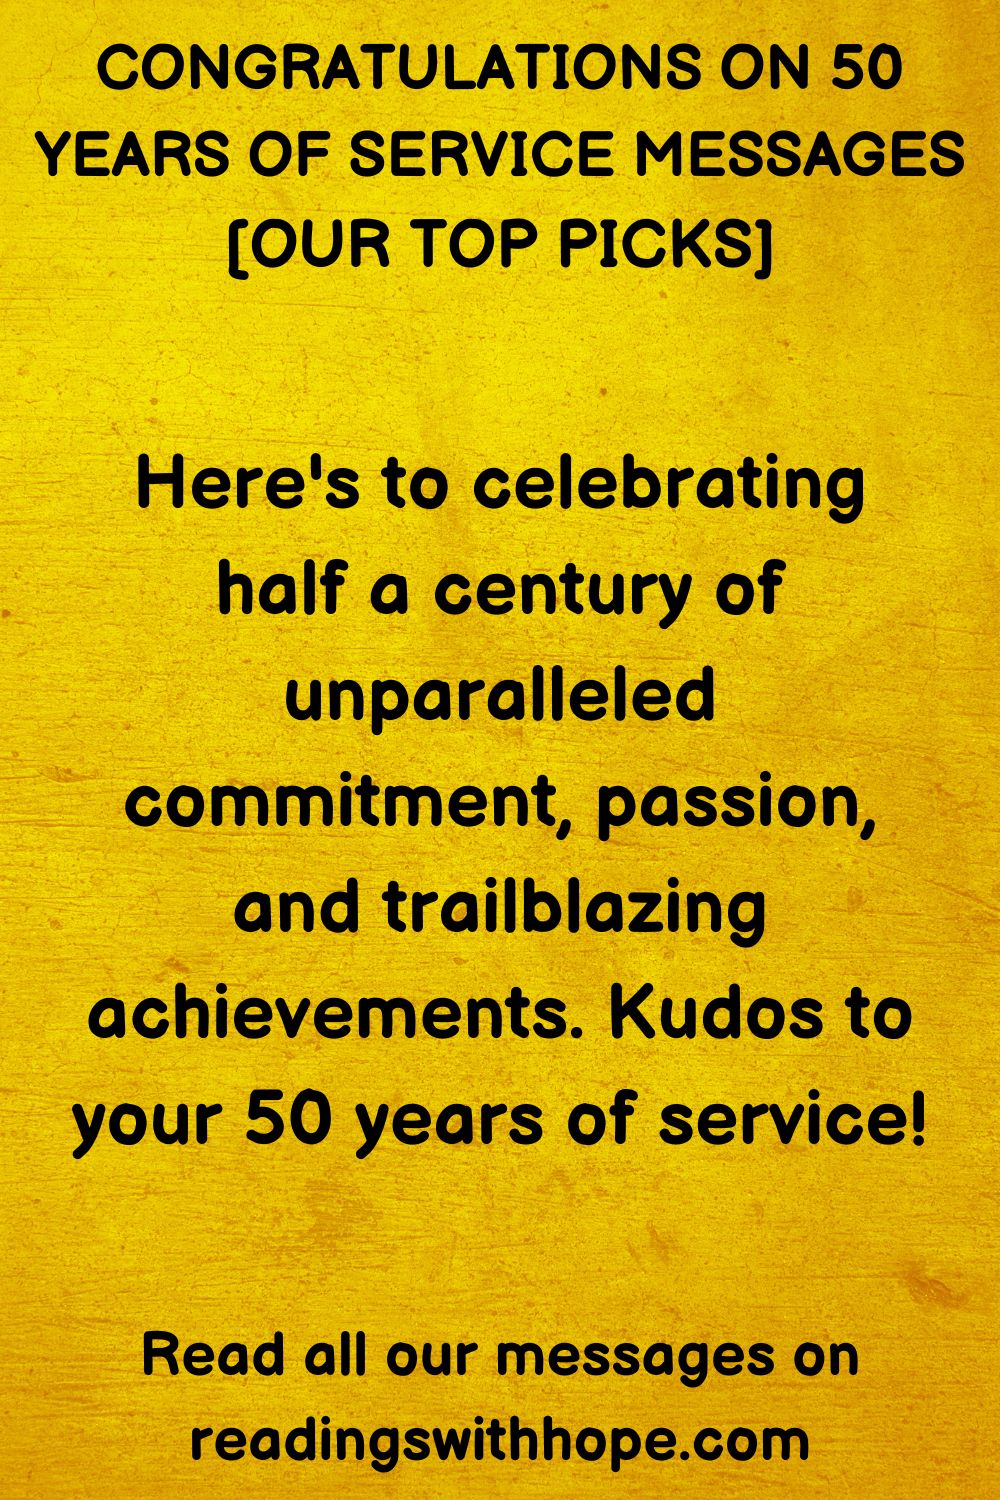 Congratulations on 50 Years of Service Message
